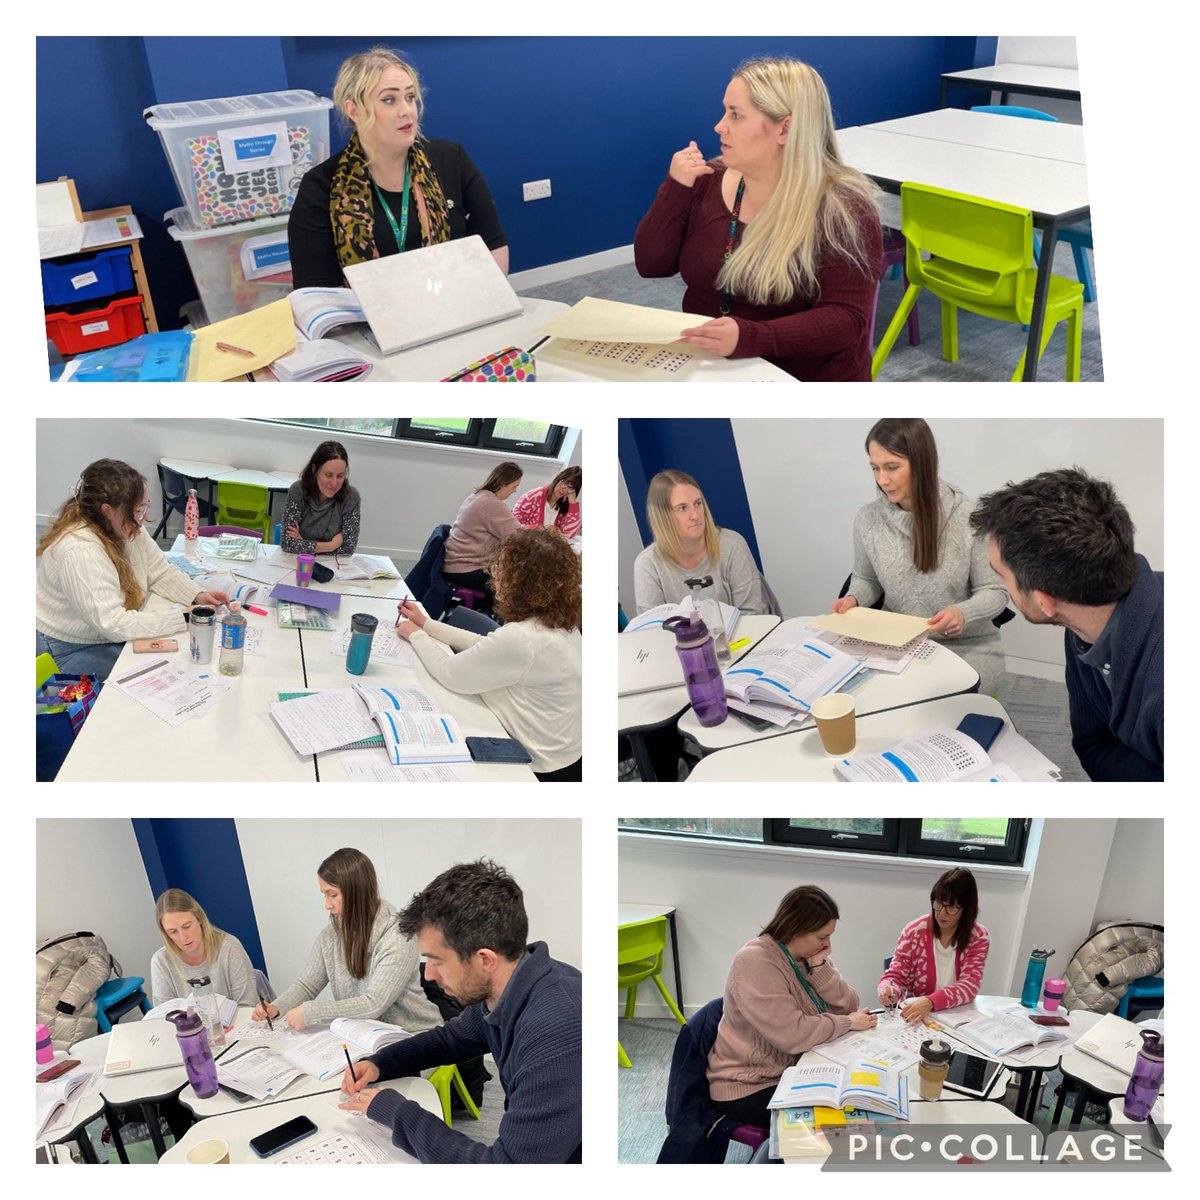 Maths Recovery - ‘Developing Number Knowledge’ - Red Book Training - fantastic review and reflection with video gap tasks . Day 3 - Addition and Subtraction - progression, refining strategies and notation! @MathsRecoveryUK @WLmaths @WL_Equity